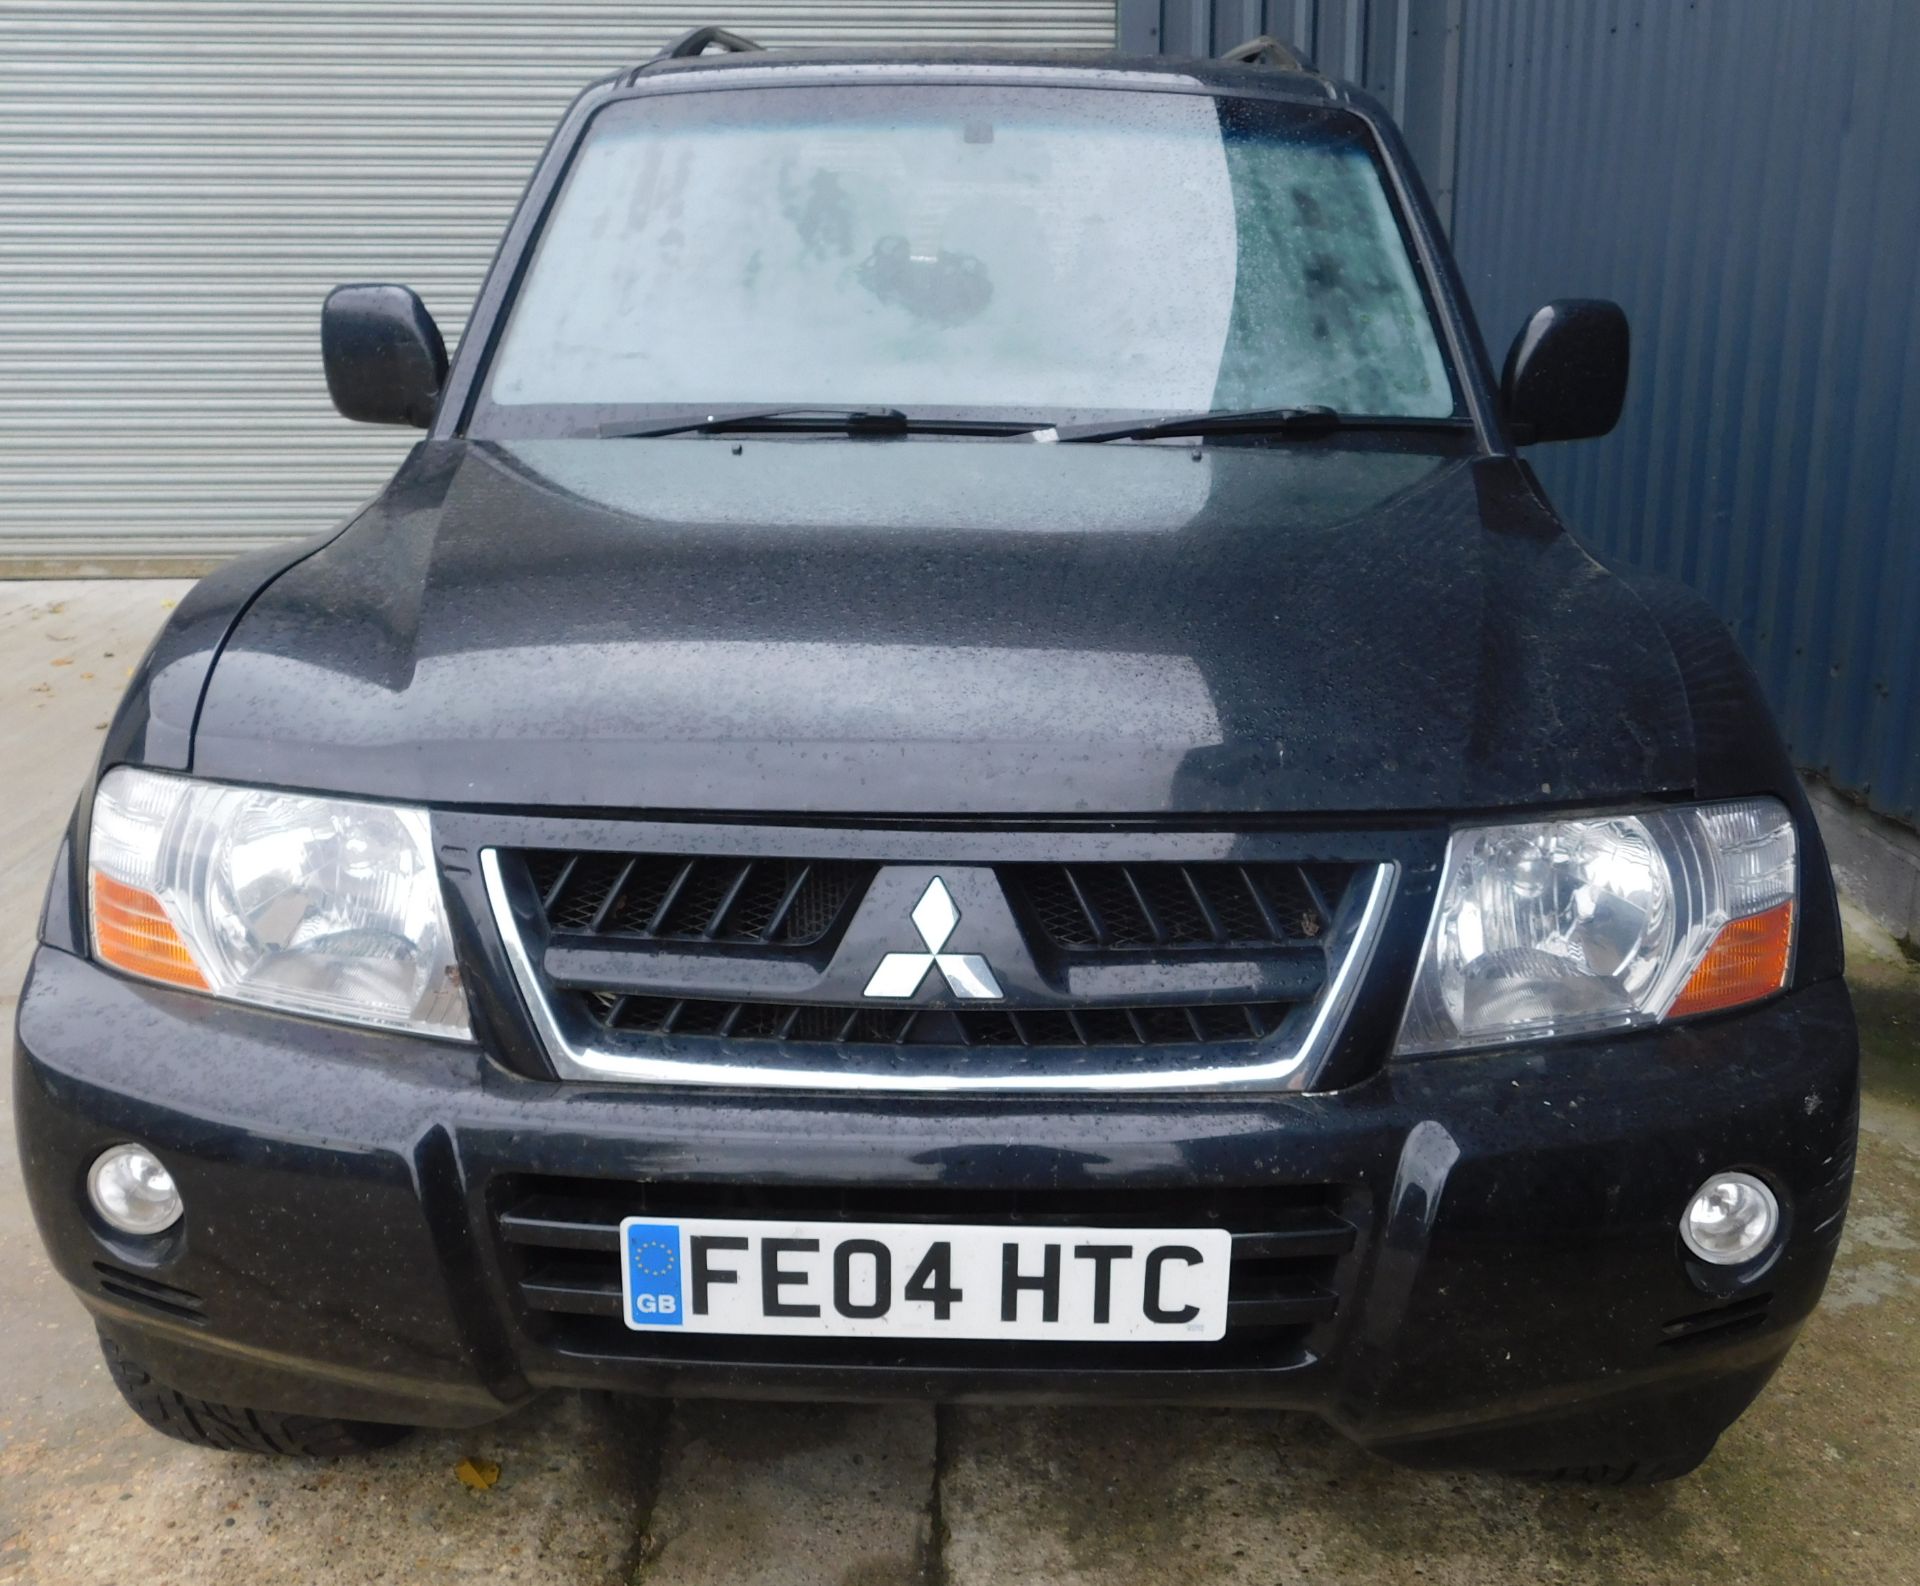 Mitsubishi Shogun 3.5 GDI Warrior 3dr Auto, Registration Number FE04 HTC, First Registered 5th March - Image 11 of 25